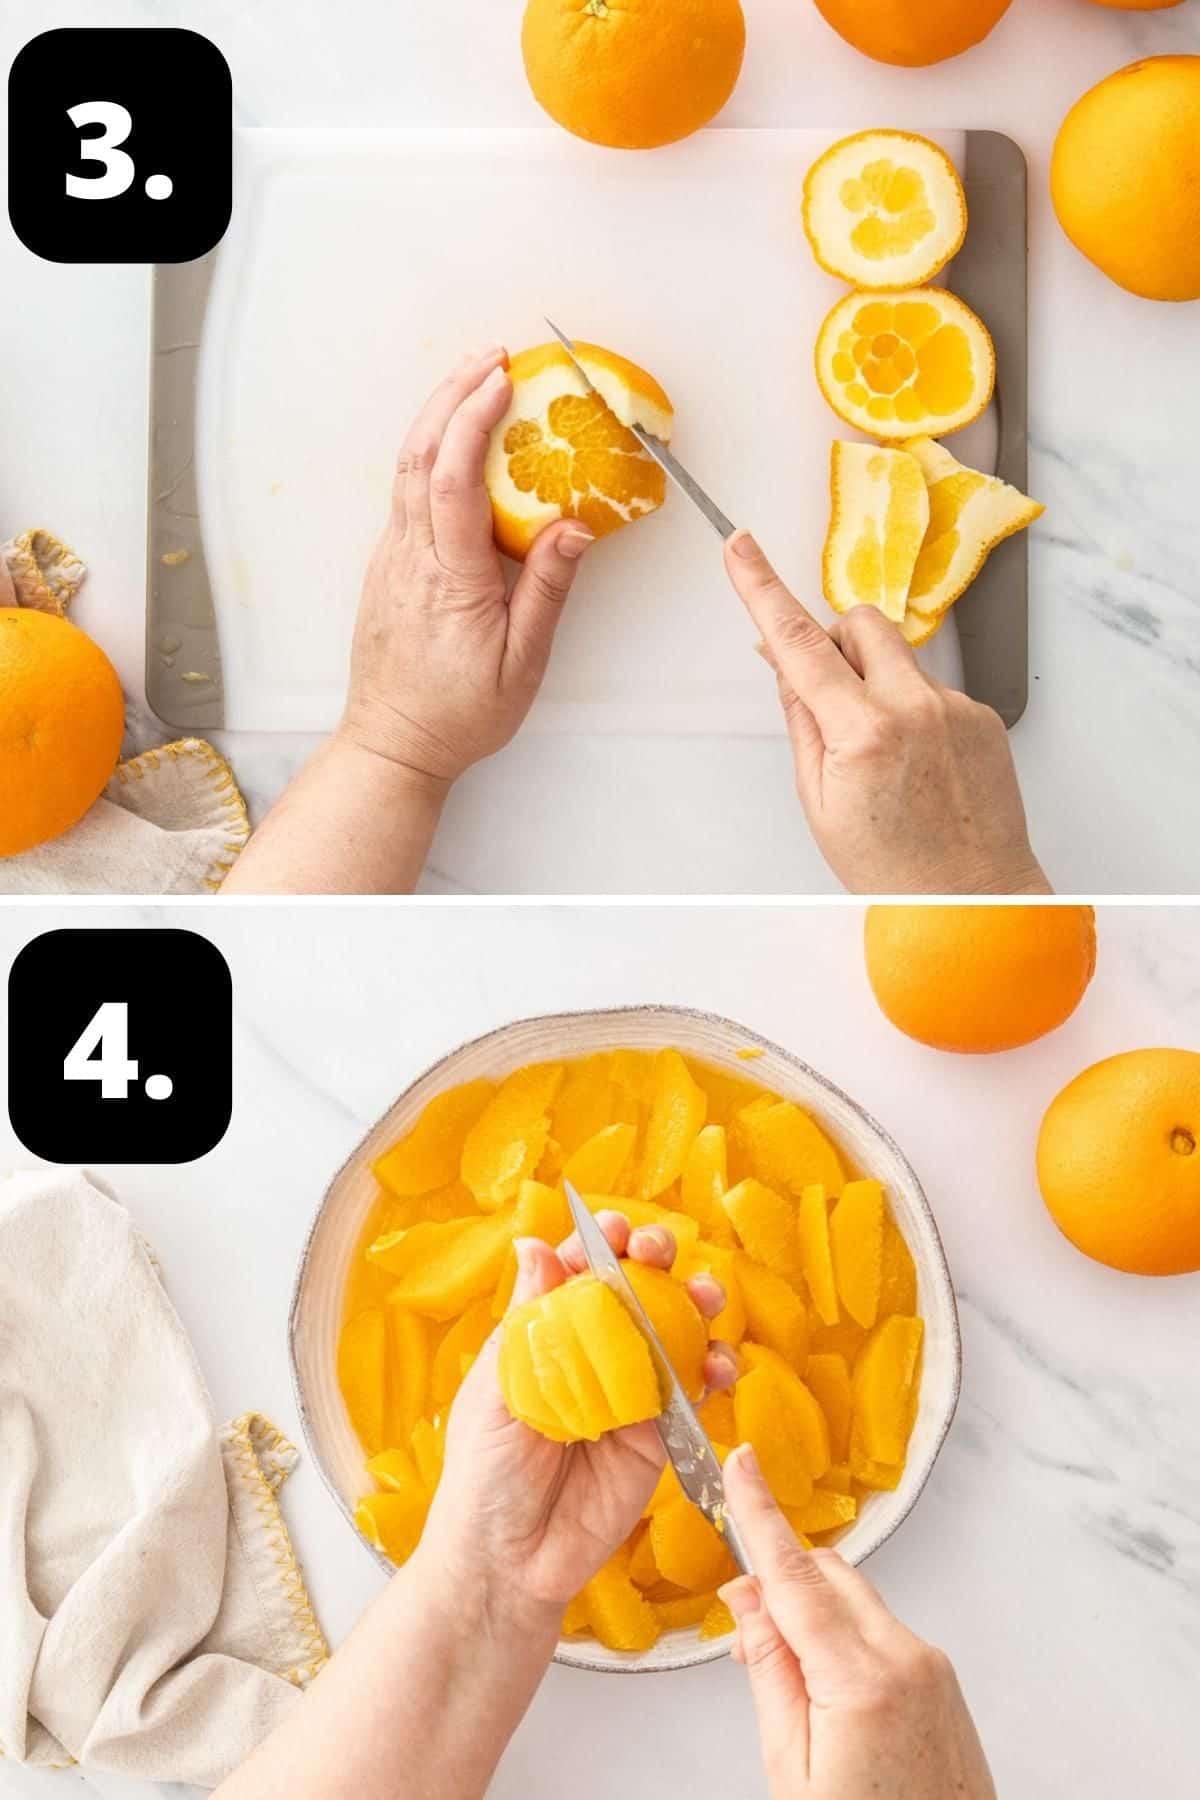 Steps 3-4 of preparing this recipe - removing the peel and segmenting the oranges.